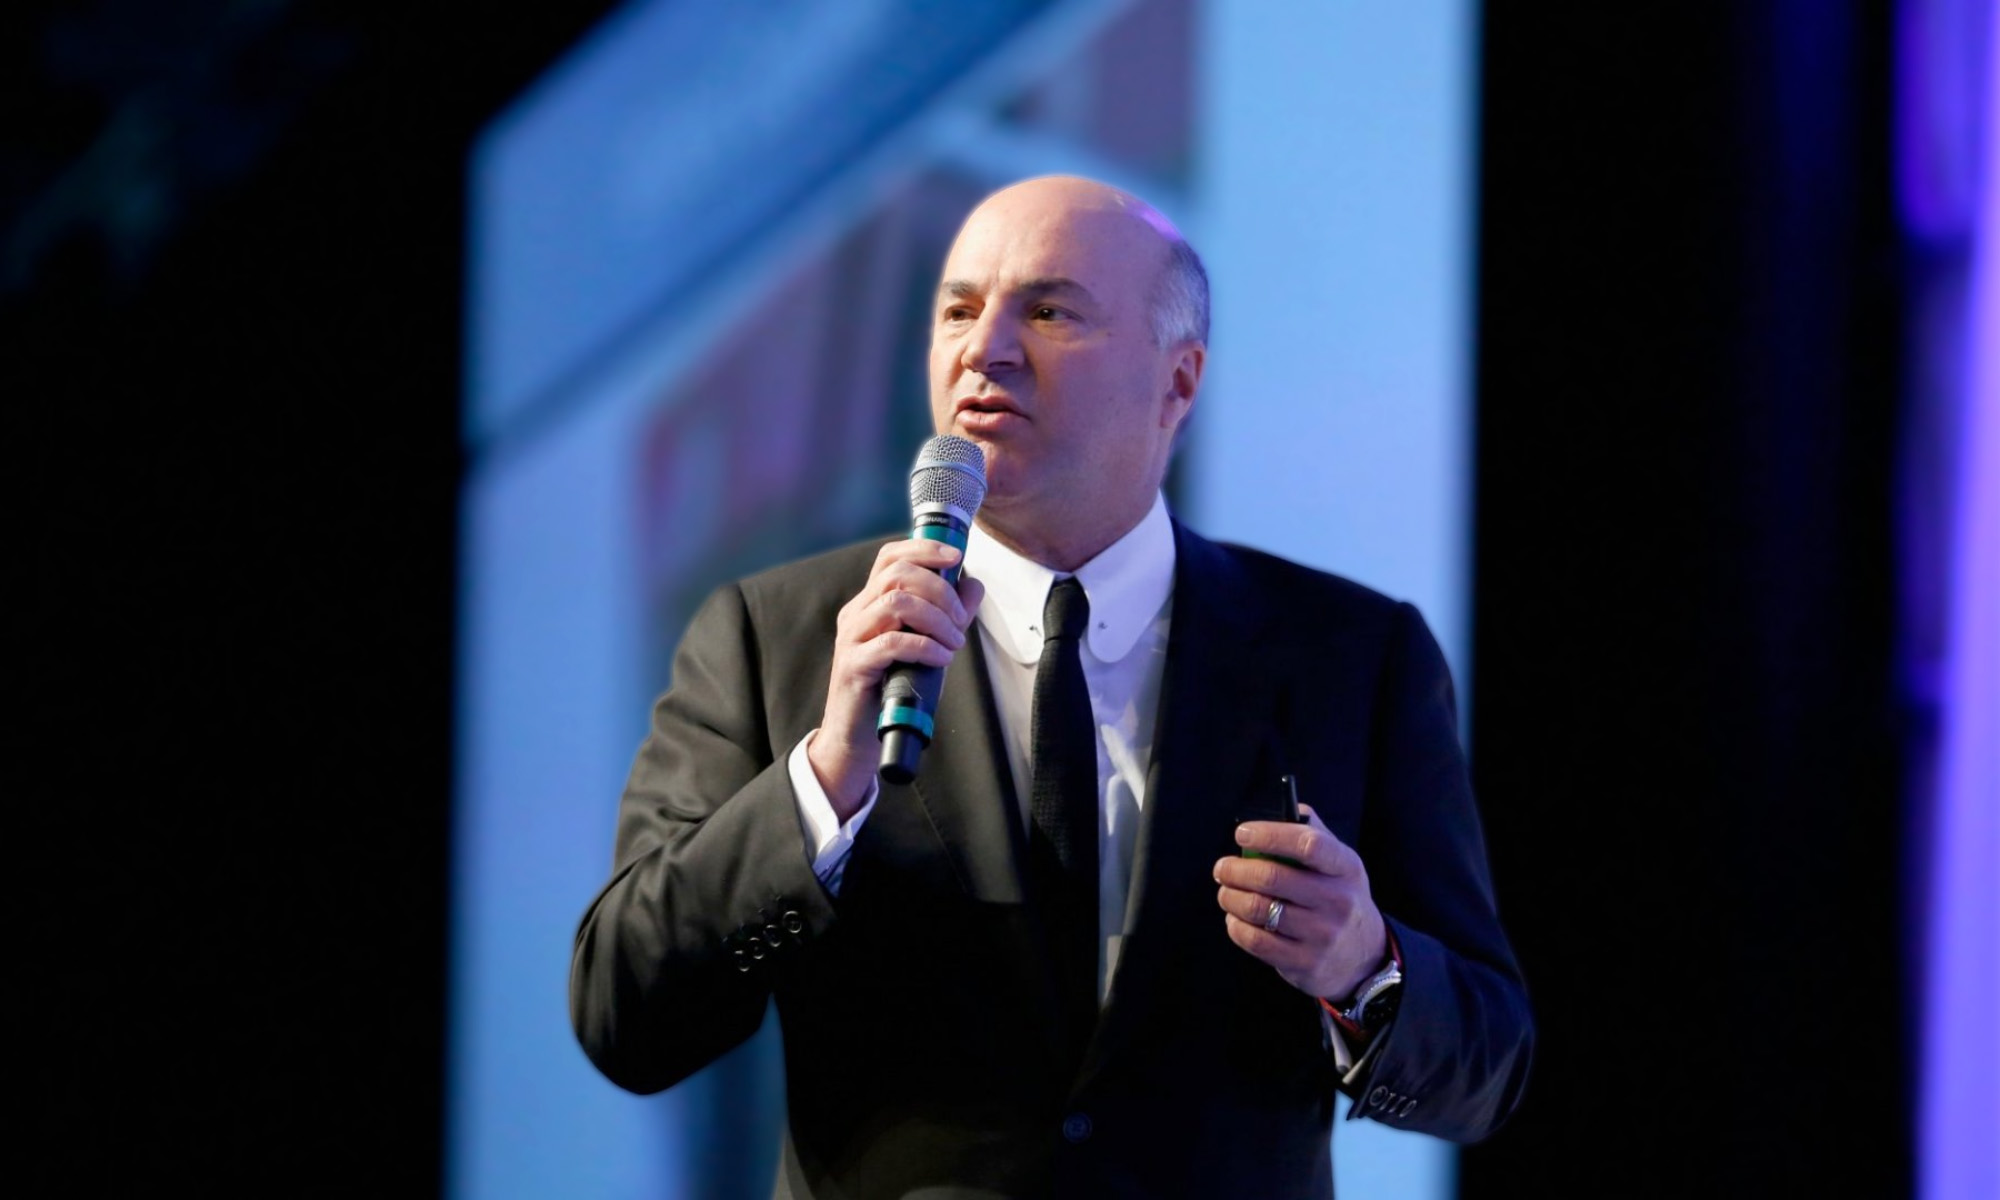 web 3.0 expert kevin o'leary to speak at blockchain awards